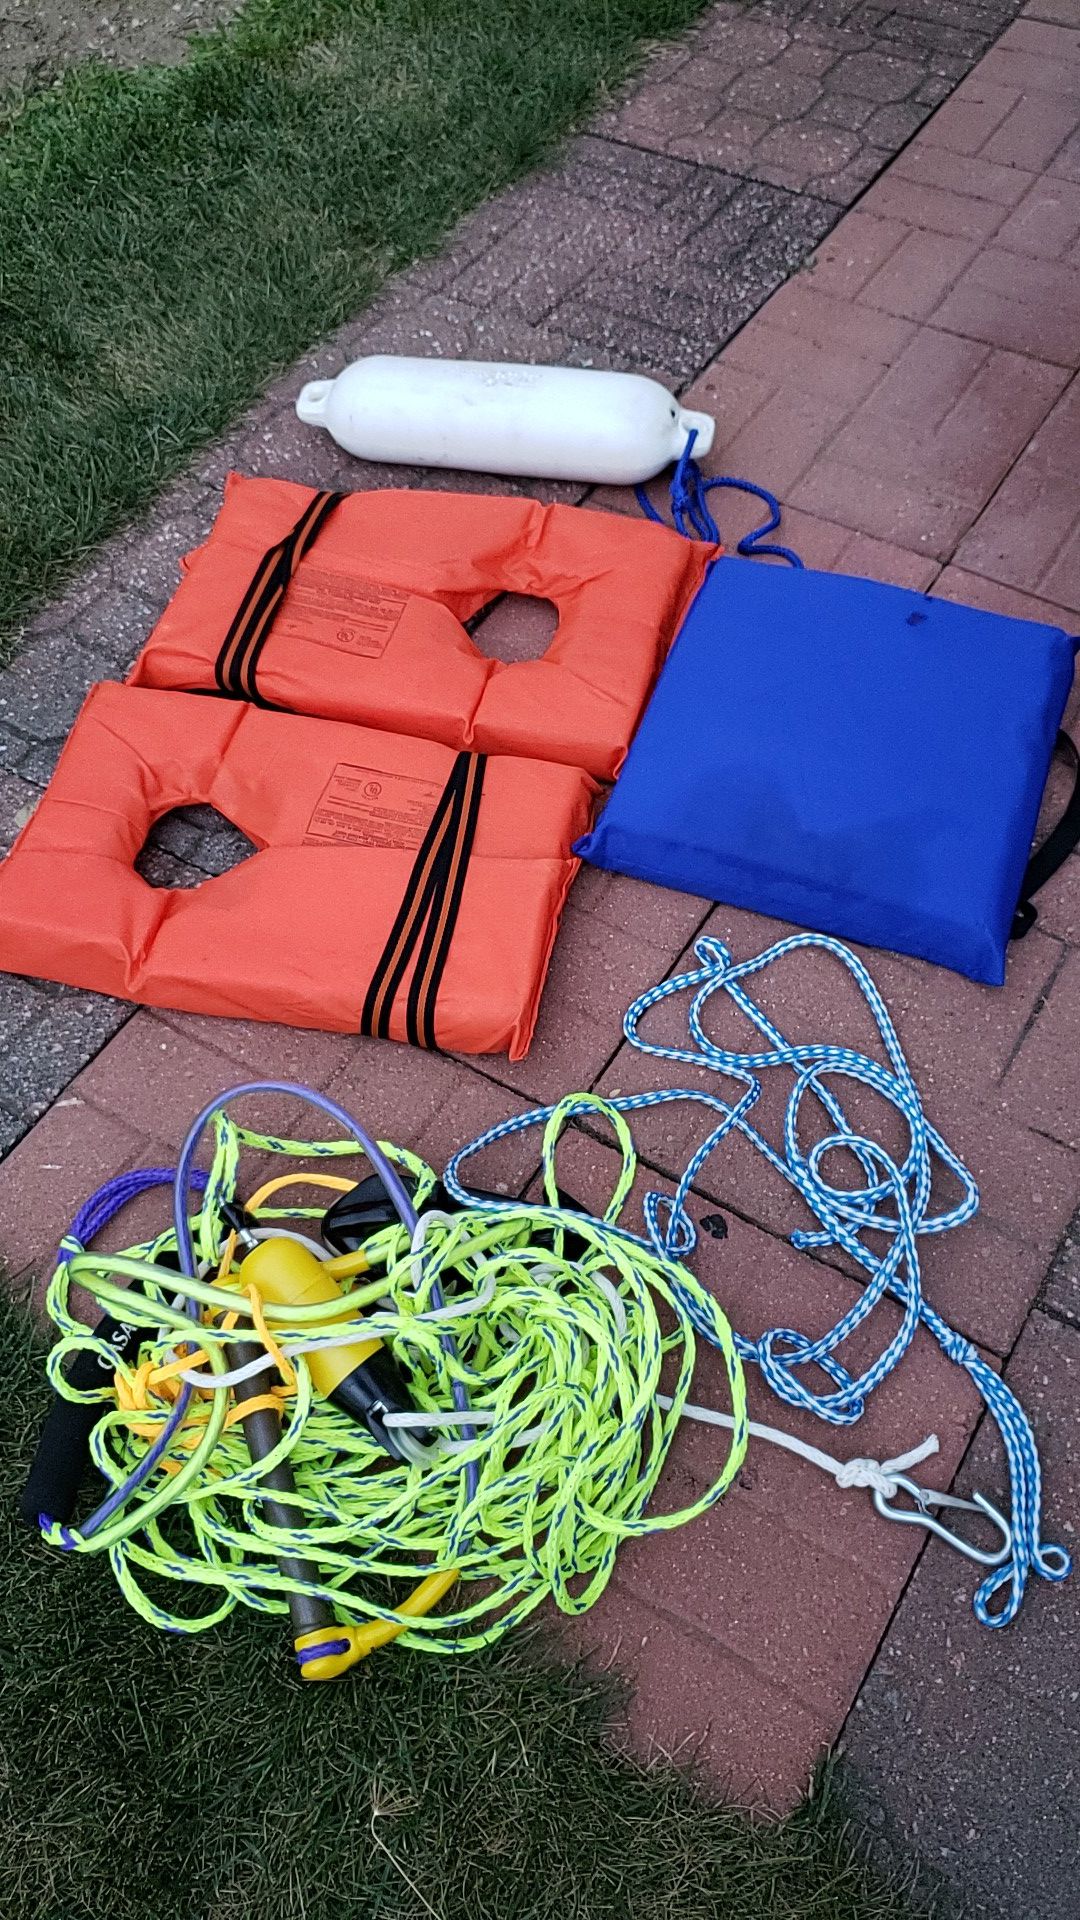 Tow rope life jacket and a boat buoy tow lines